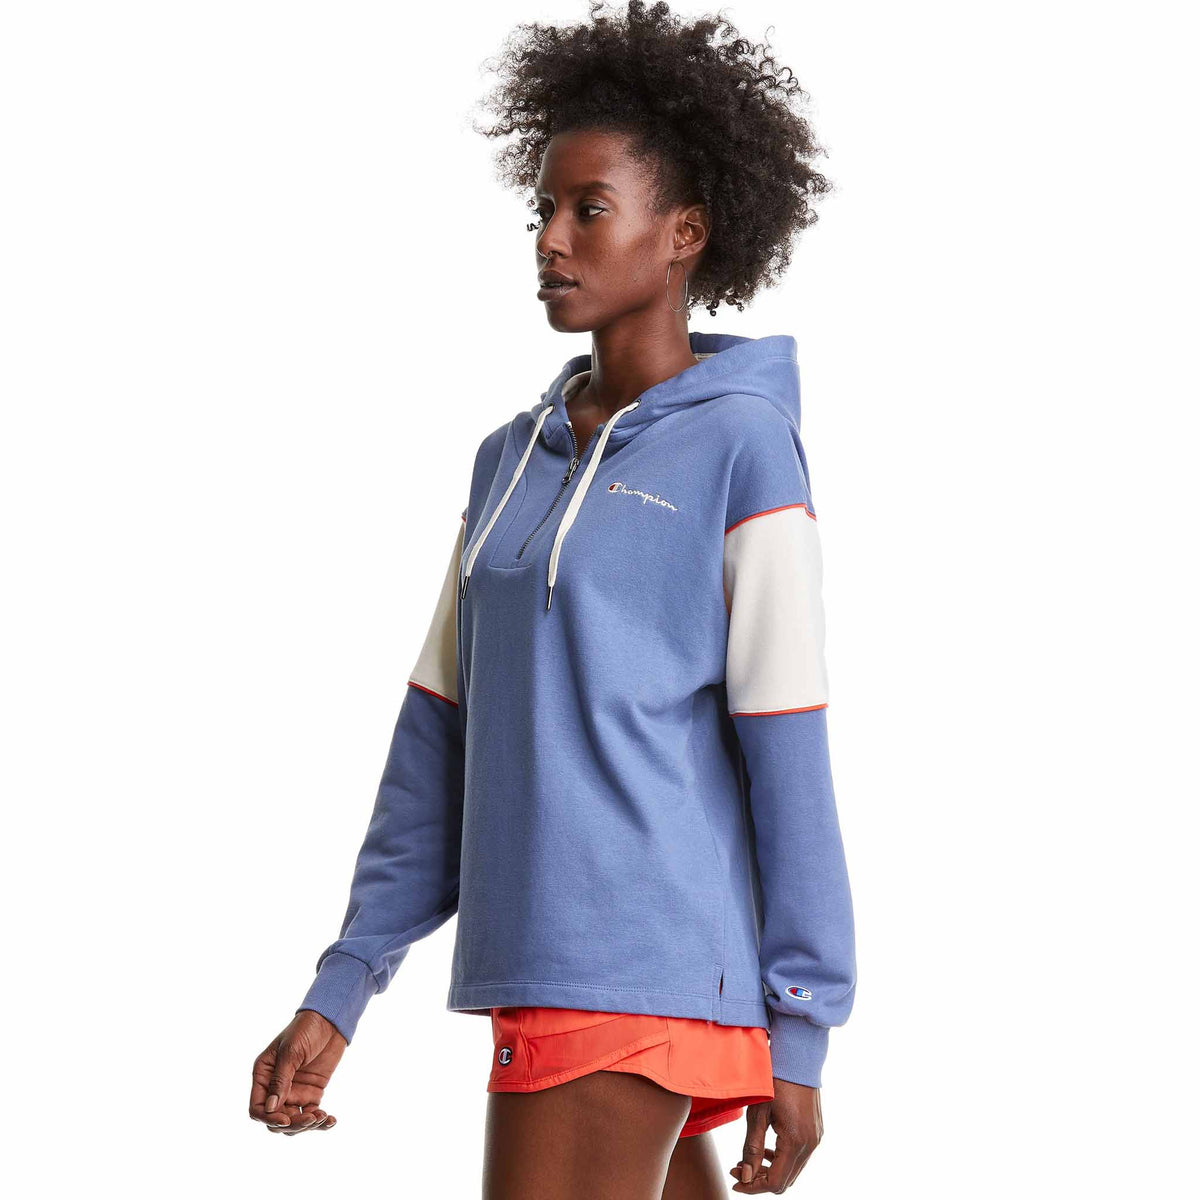 Champion Campus French Terry 1/4 Zip Oversized Hoodie Chandail à capuche pour femme Seven Seas Blue angle 2